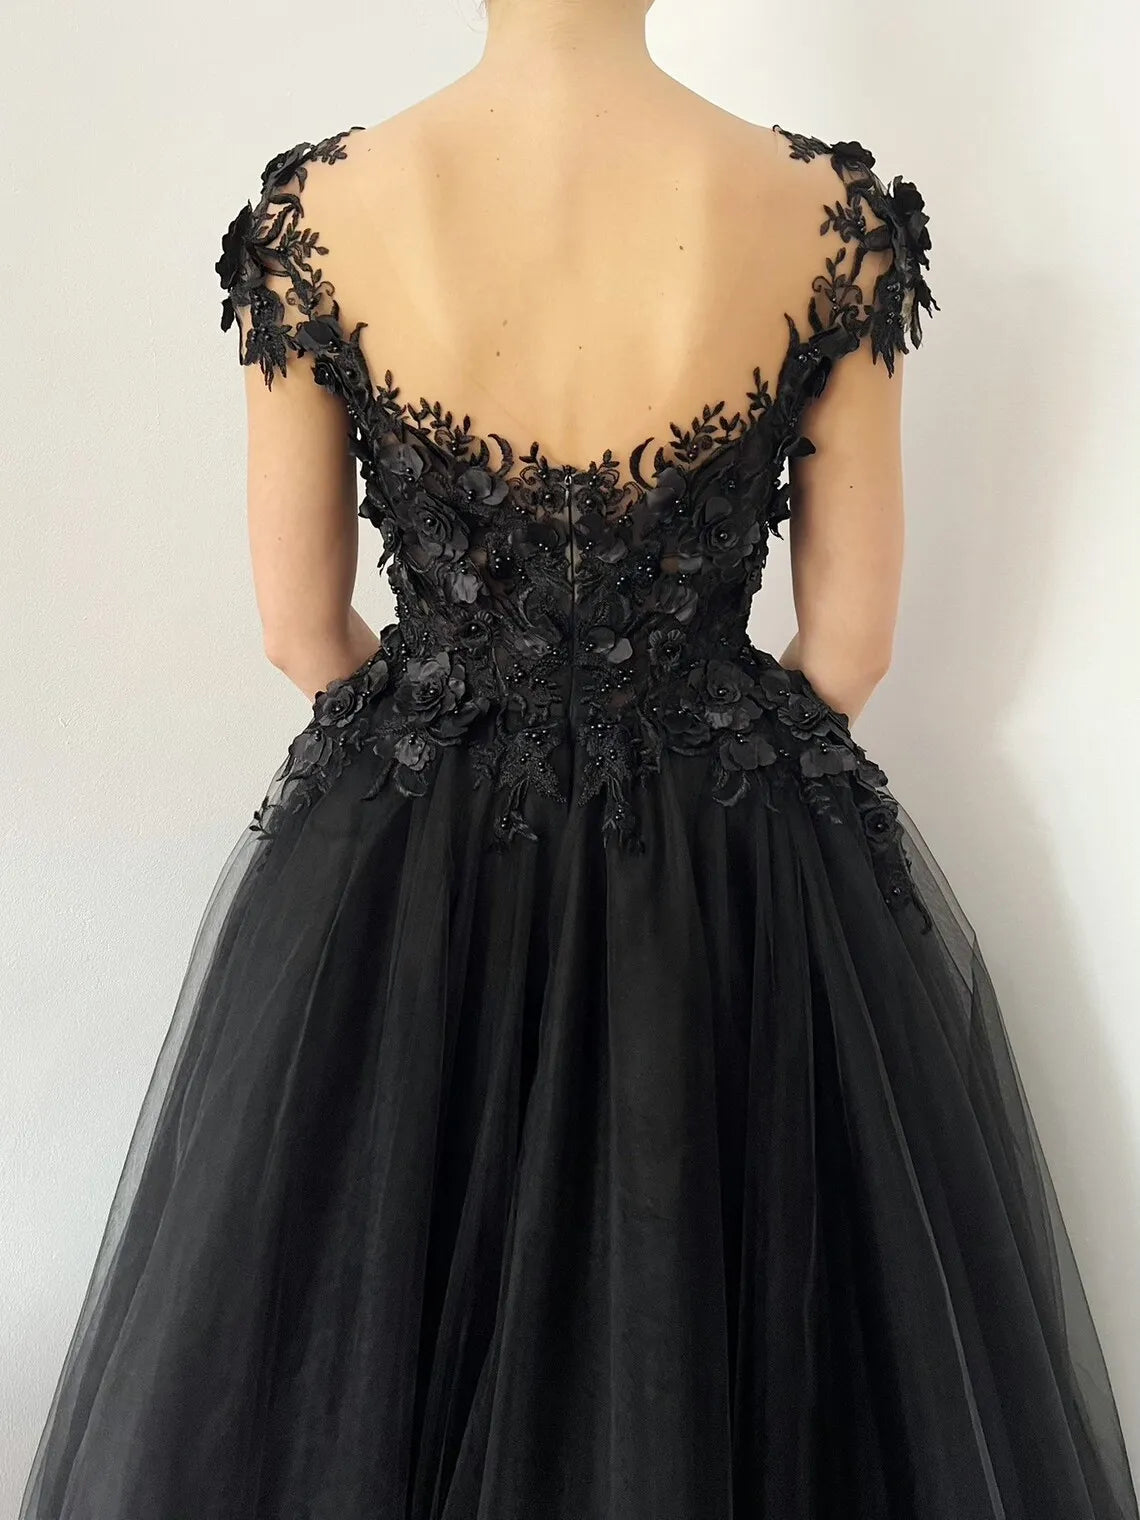 Beaded Evening Dress Black Sheer Neck Ball Gown Tulle Lace Applique Floral Formal Party Prom Gowns Women Long Floor Length